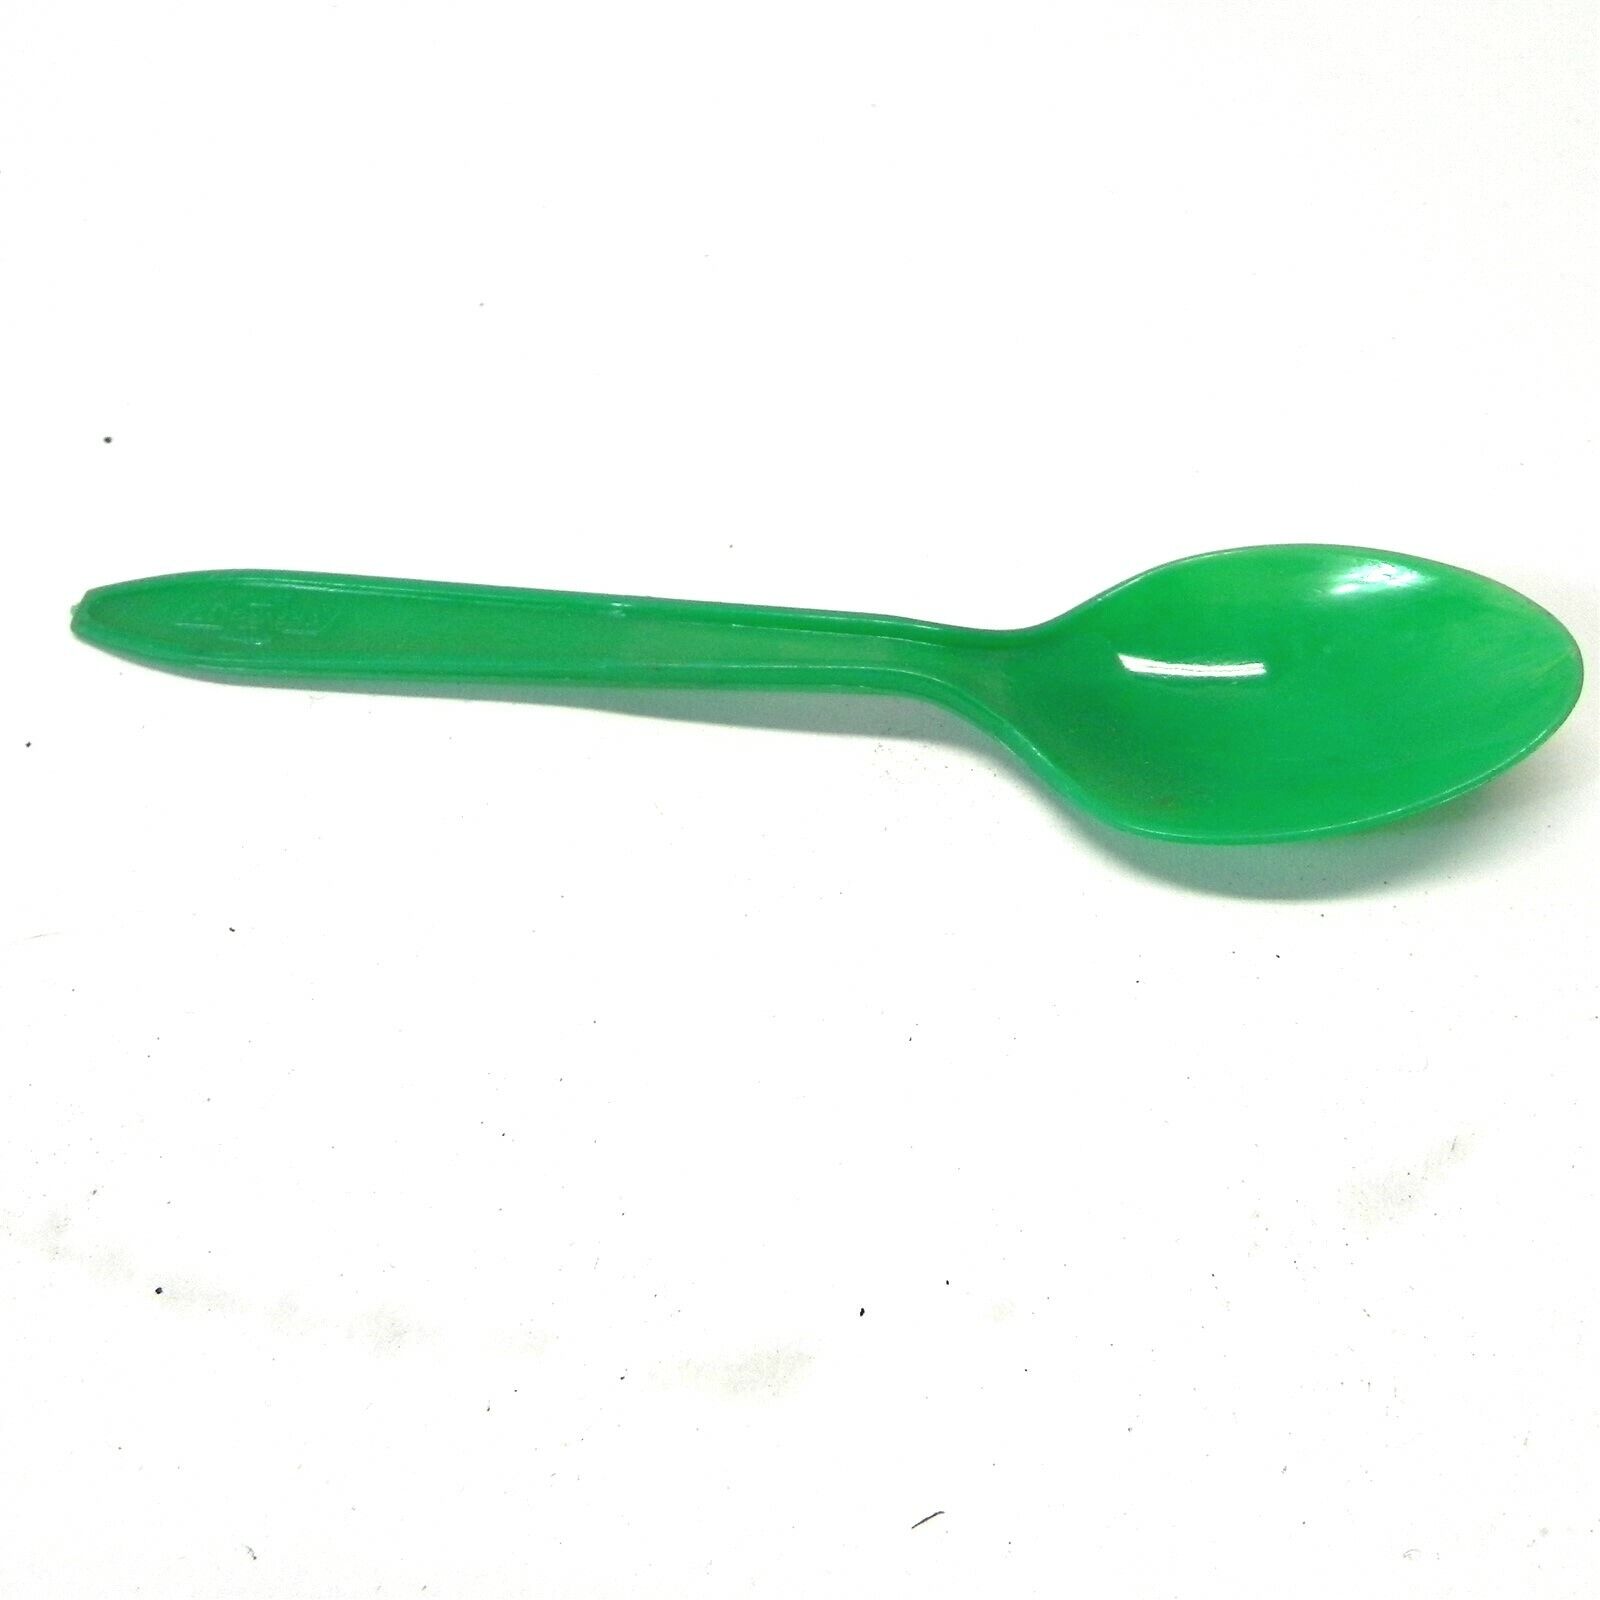 VINTAGE 1940S 1950S CHEVROLET CHEVY BOWTIE DEALERSHIP CHEVY PLASTIC SPOON GREEN 